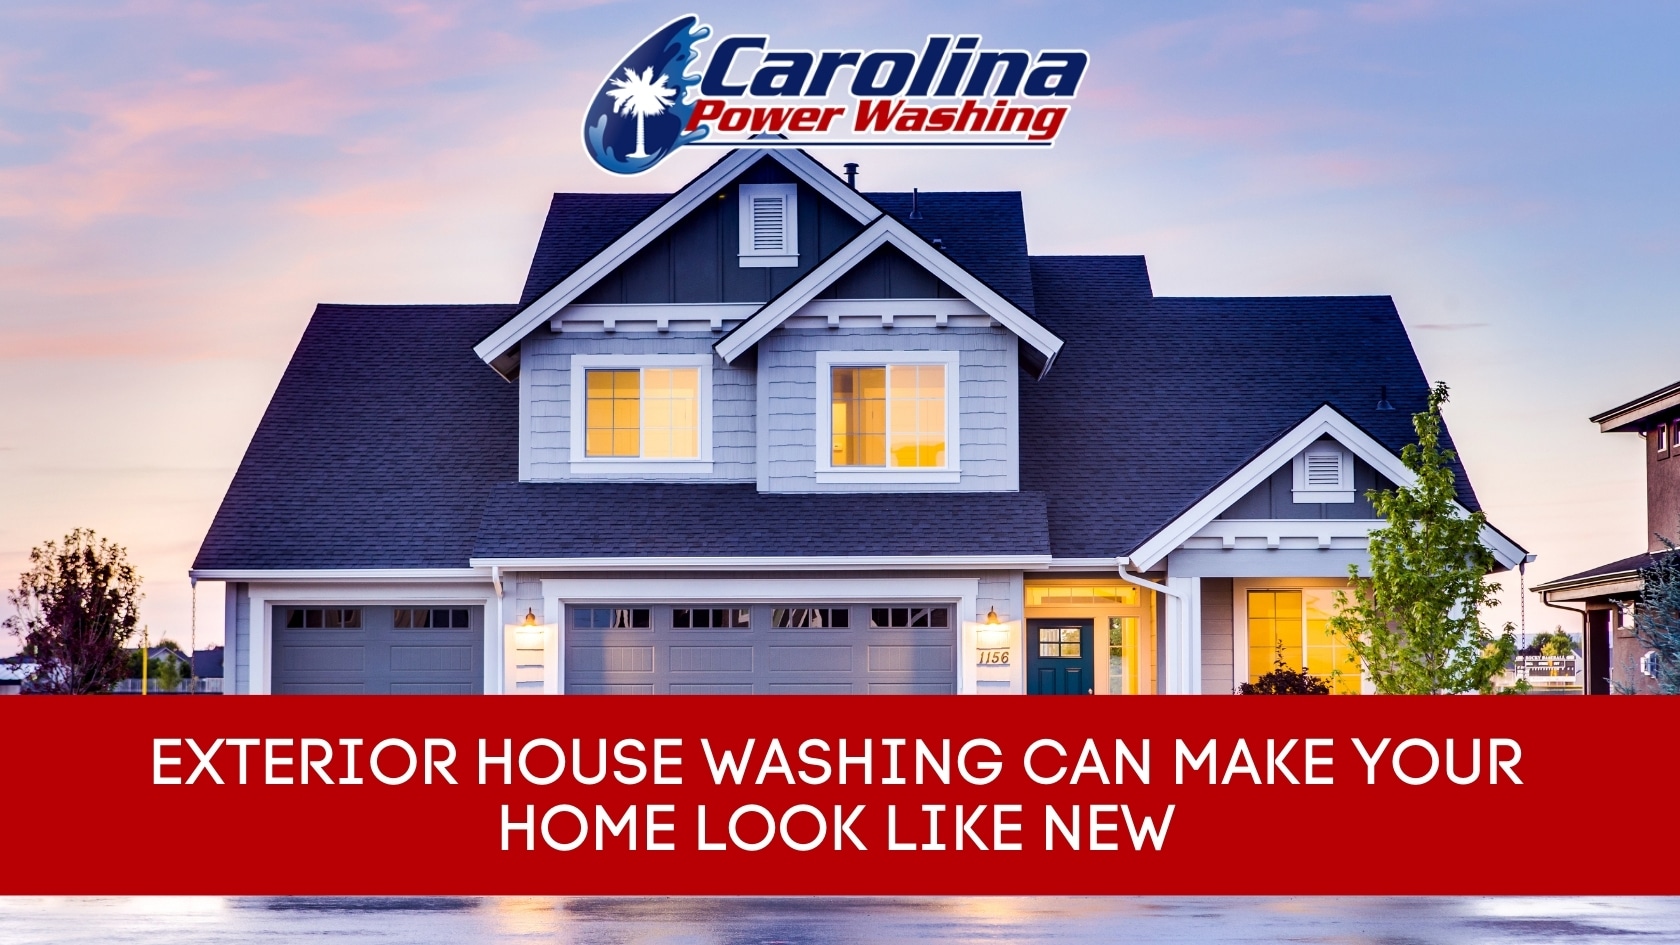 Exterior House Washing Can Make Your Home Look Like New